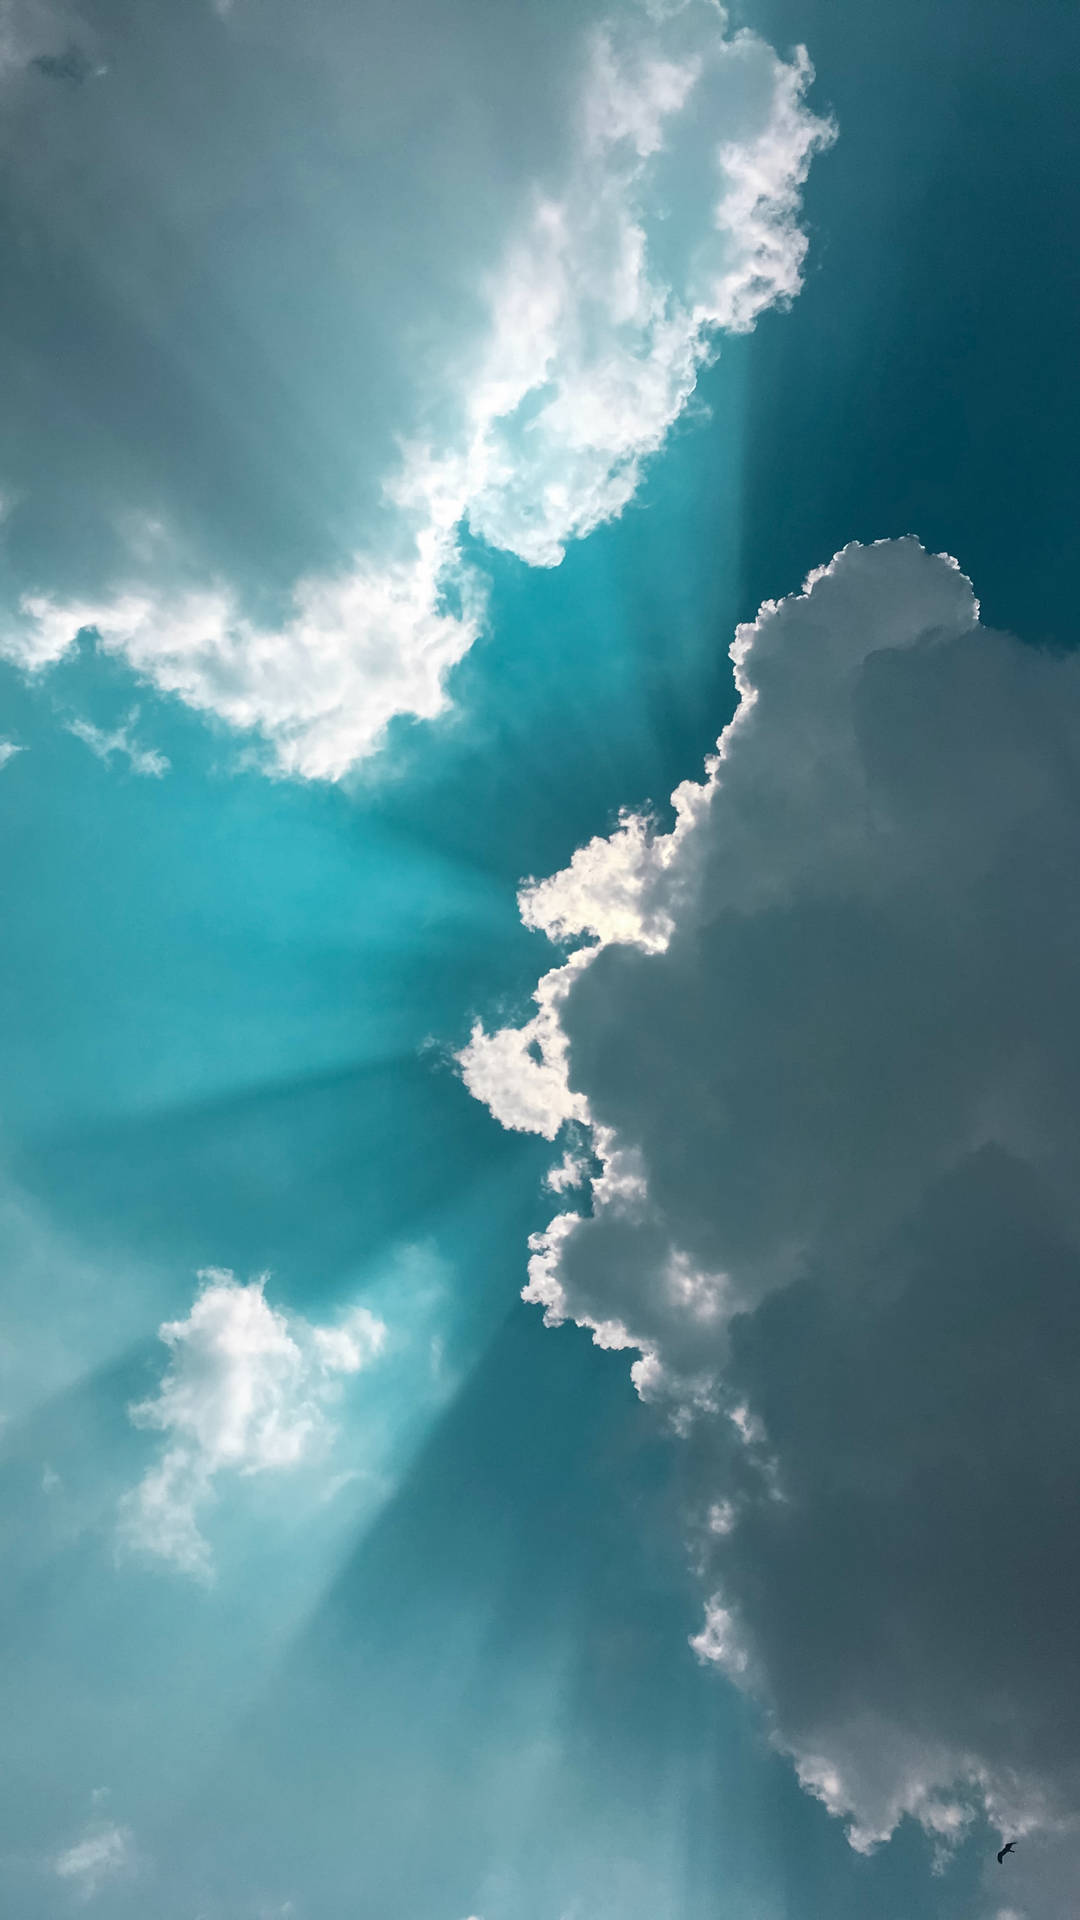 Clouds In Turquoise Sky Background